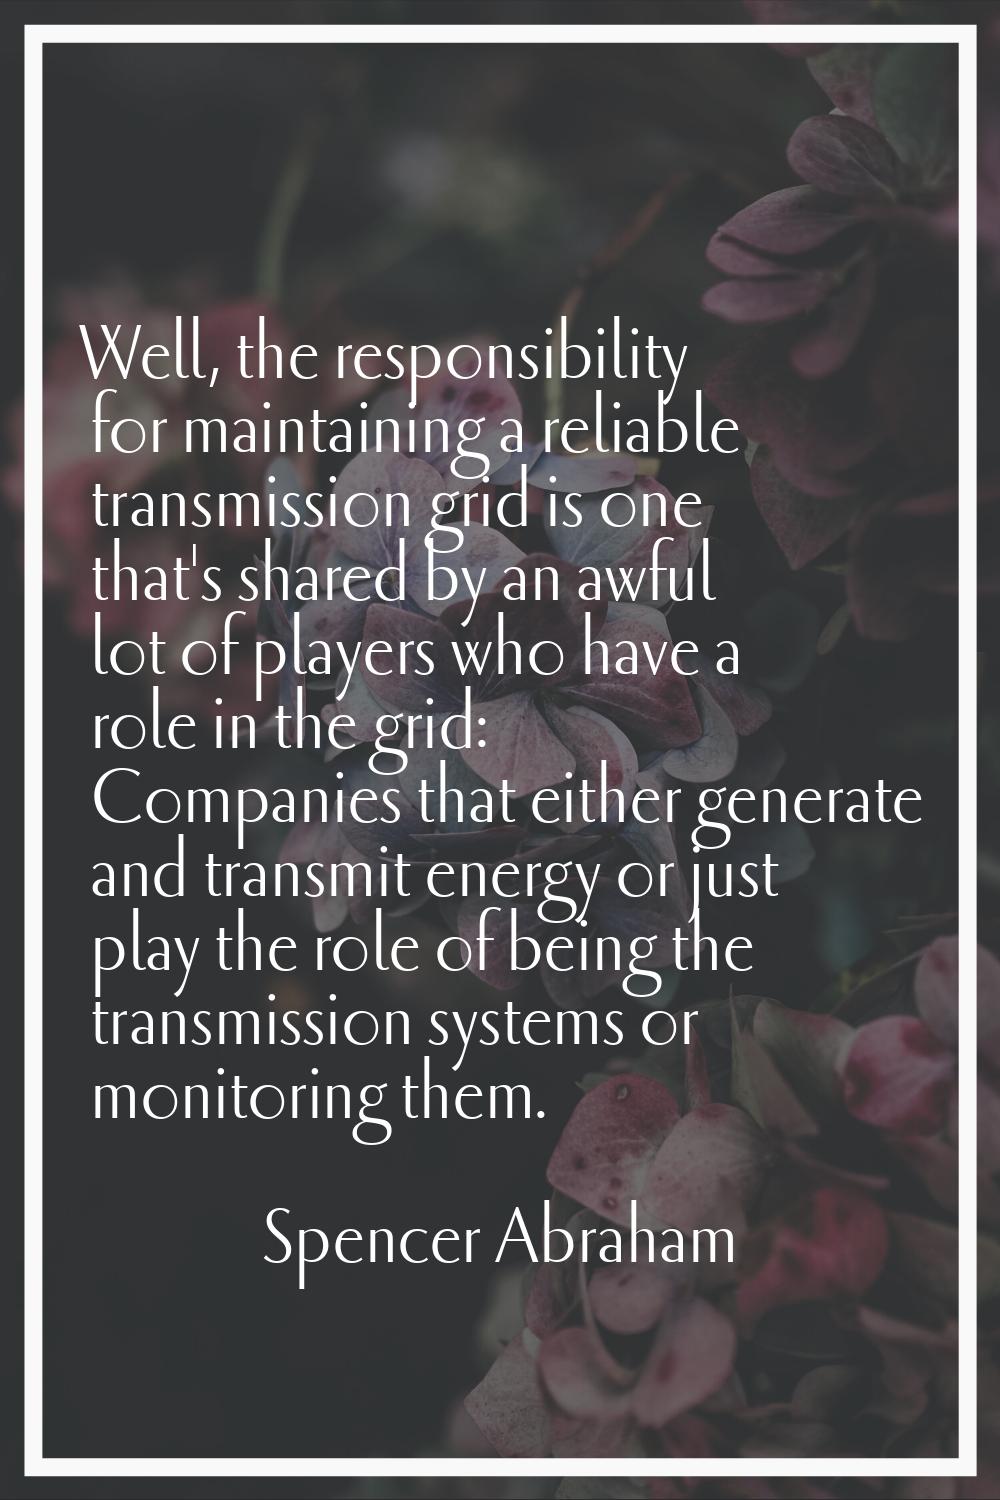 Well, the responsibility for maintaining a reliable transmission grid is one that's shared by an aw